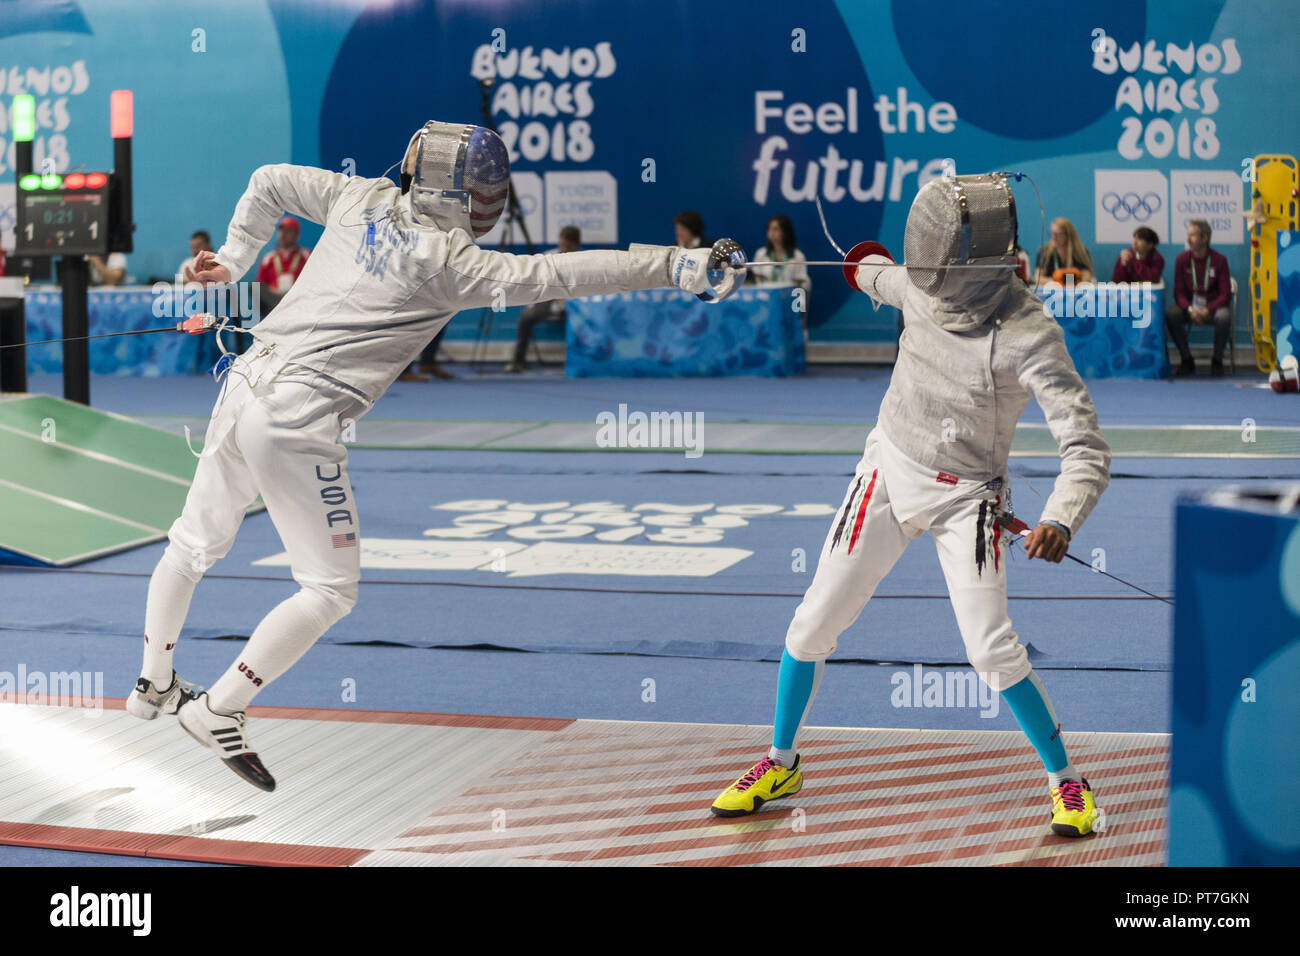 City Of Buenos Aires, City of Buenos Aires, Argentina. 7th Oct, 2018. SPORT. City of Buenos Aires, Argentina - 2018, October 7.- VIDOVSZKY ROBERT, USA, competes with MAHBAS MAHDI, Iraq, in MenÂ´s Individual Sabre in fencing on day one of Buenos Aires 2018 Youth Olympic Games at Youth Olympic Park on October 7, 2018 in City of Buenos Aires, Argentina. Credit: Julieta Ferrario/ZUMA Wire/Alamy Live News Stock Photo